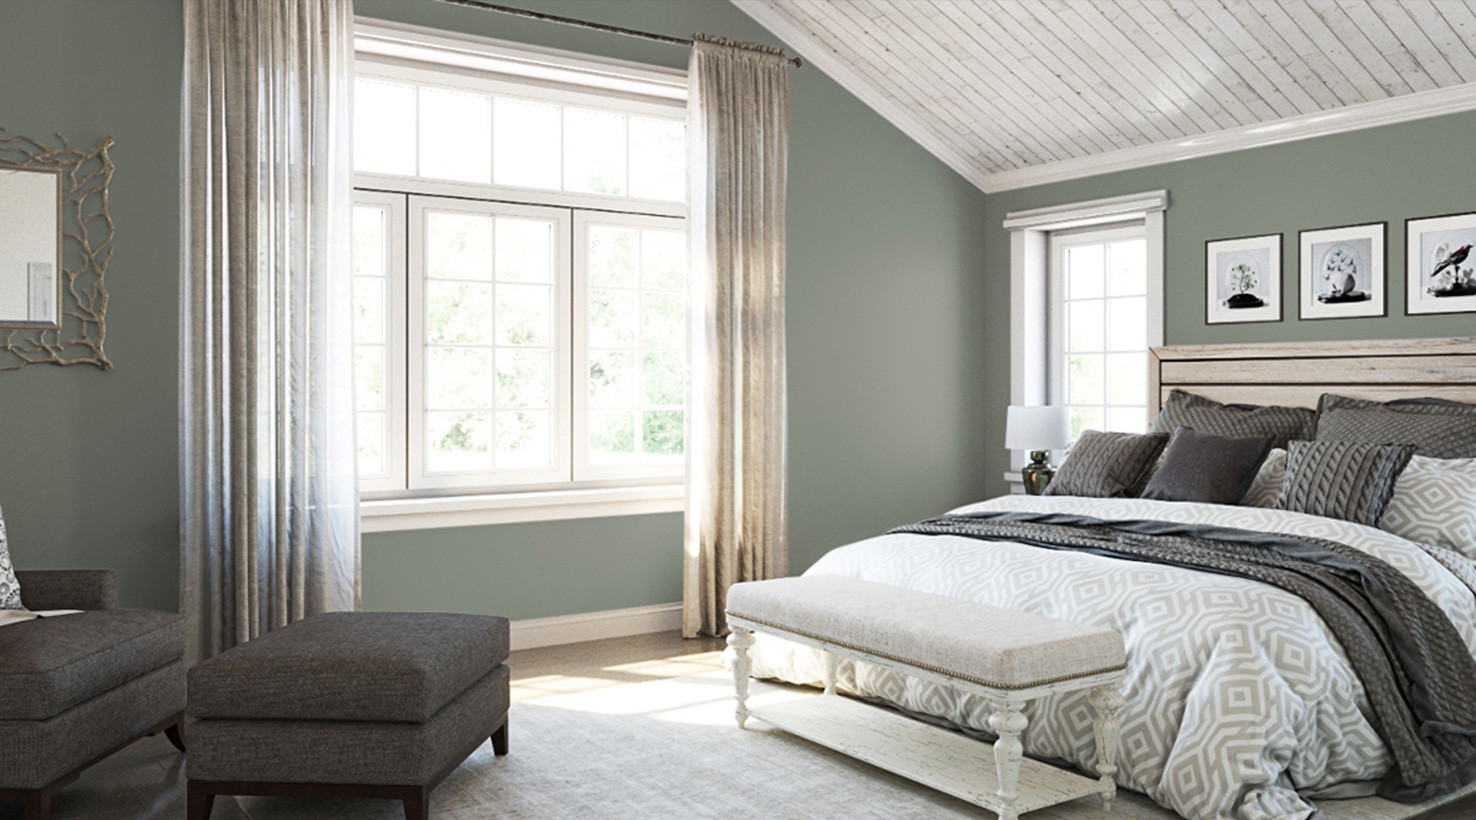 Green Paint For Bedroom
 Bedroom Paint Color Ideas Inspiration Gallery